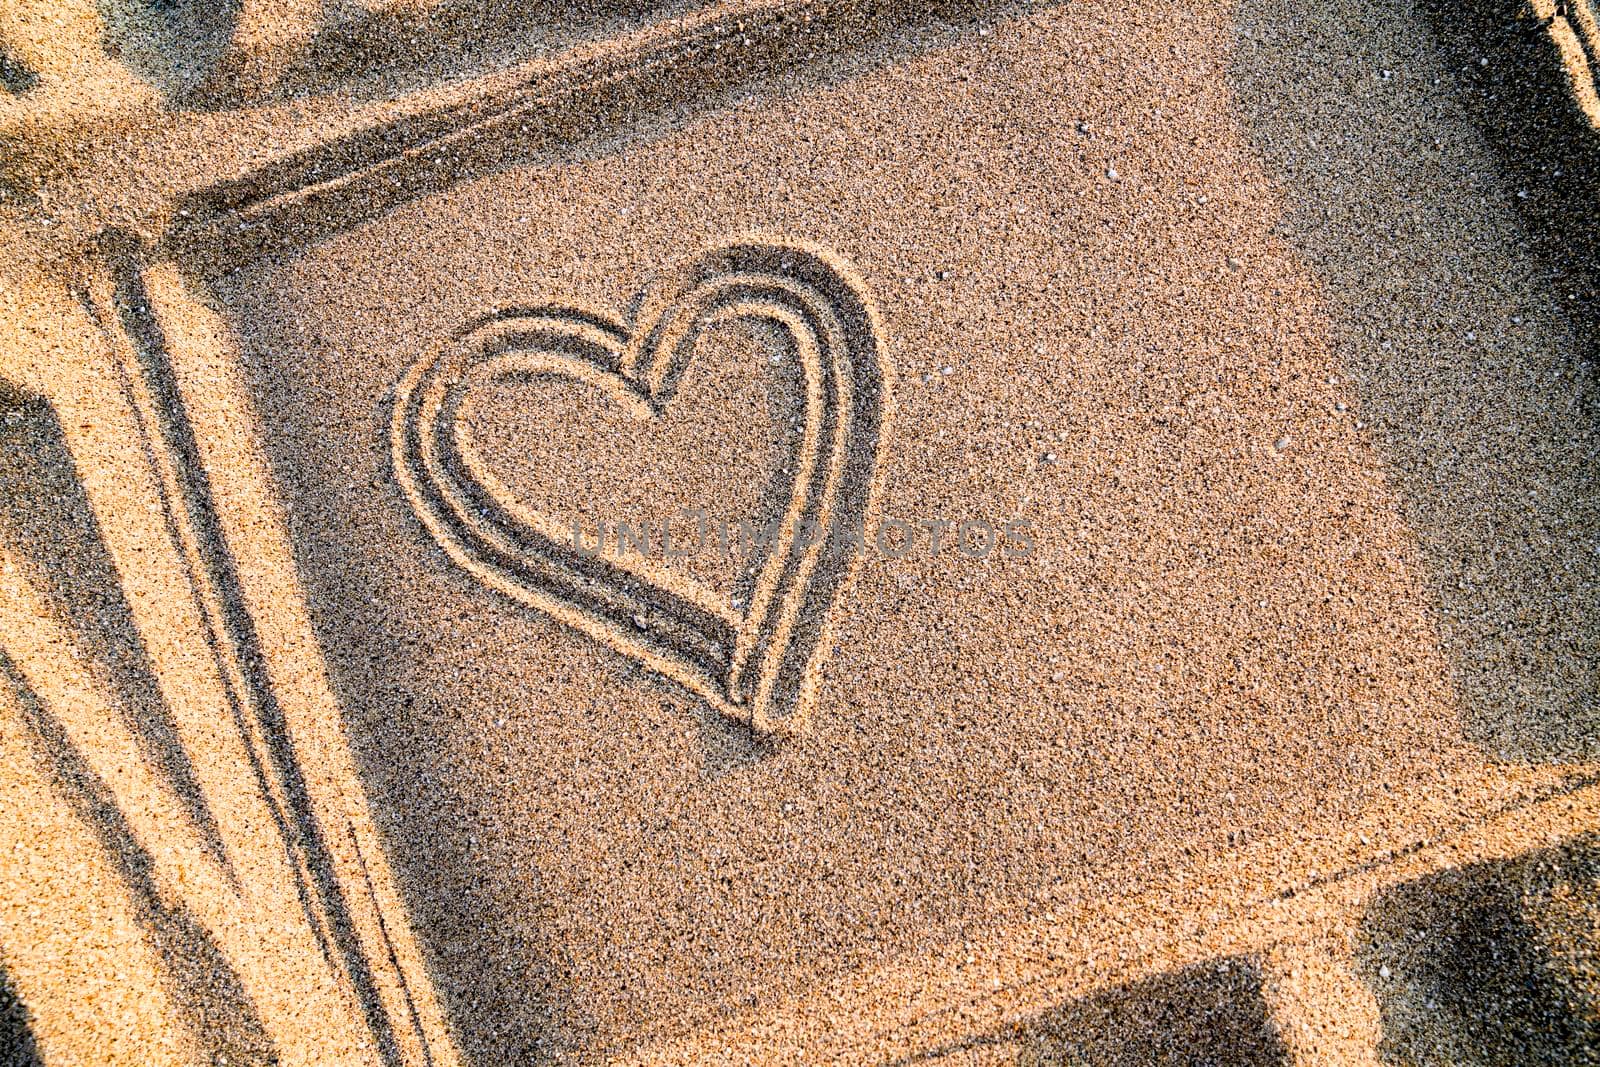 Heart drawn on sand in frame, close-up. Copy space. by Laguna781